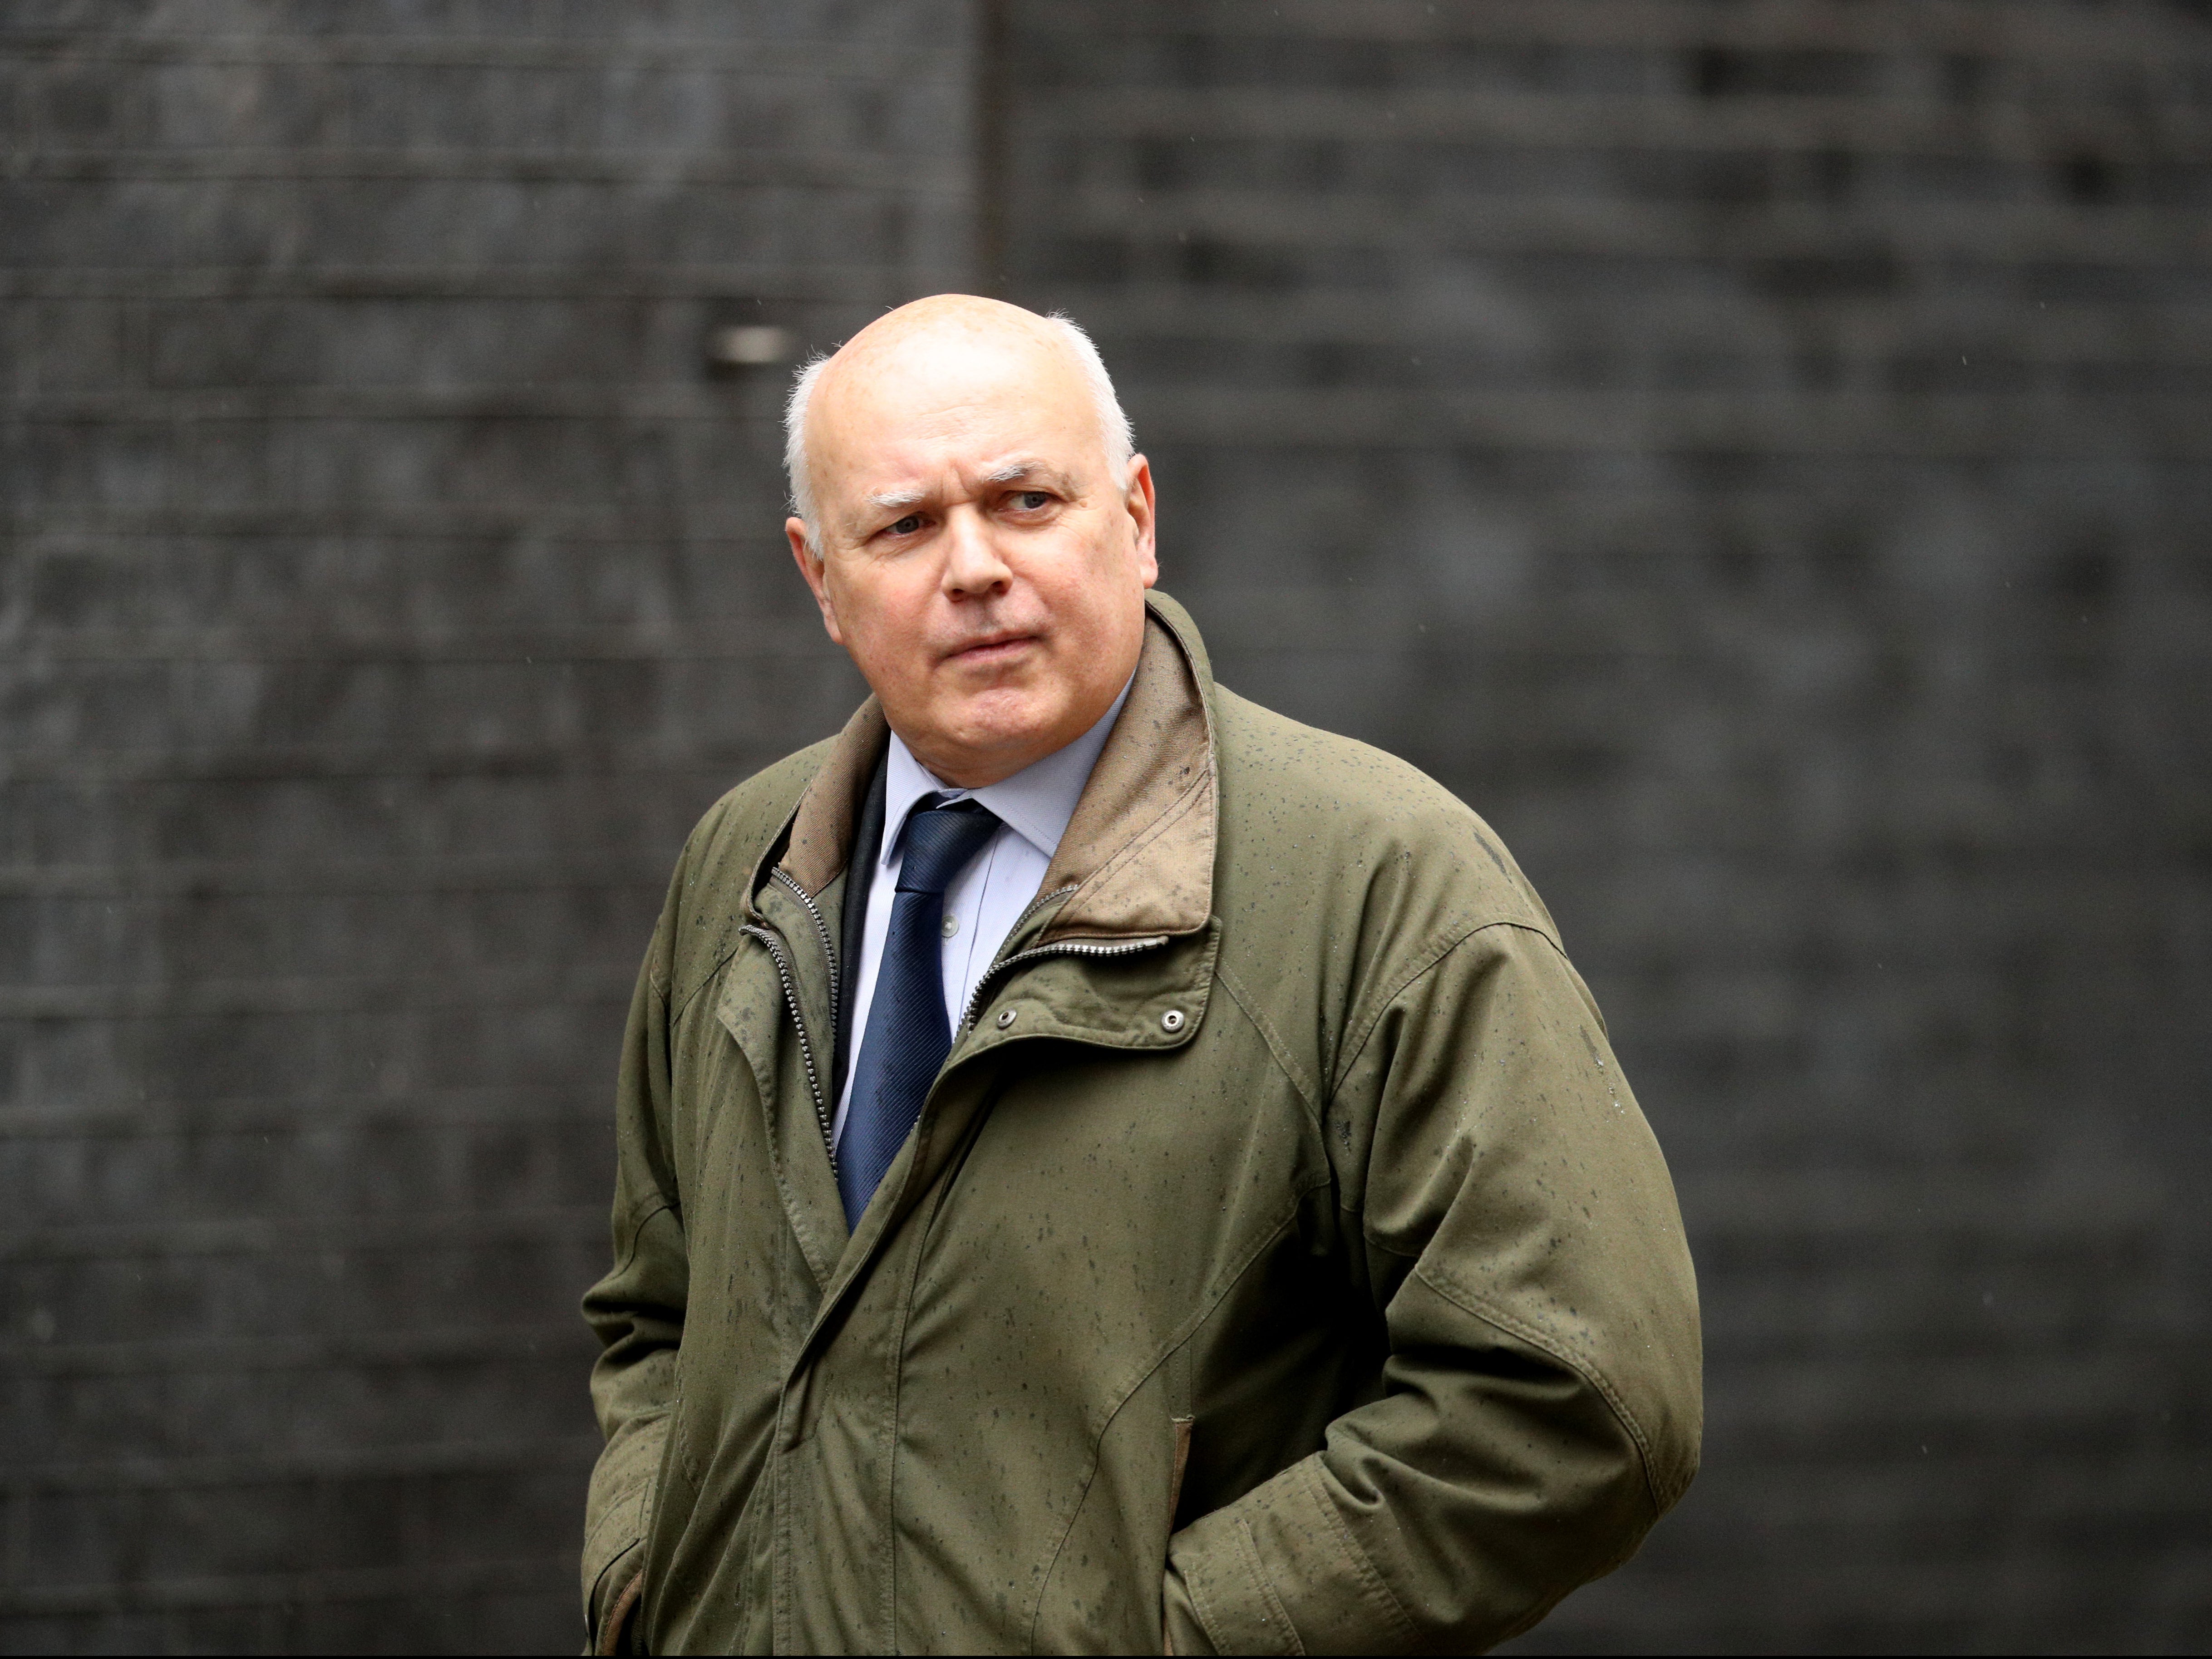 ‘Immigration control is nothing to do with this. If the Home Office officials want to blur the lines, then they are the guilty parties,’ says Ian Duncan Smith